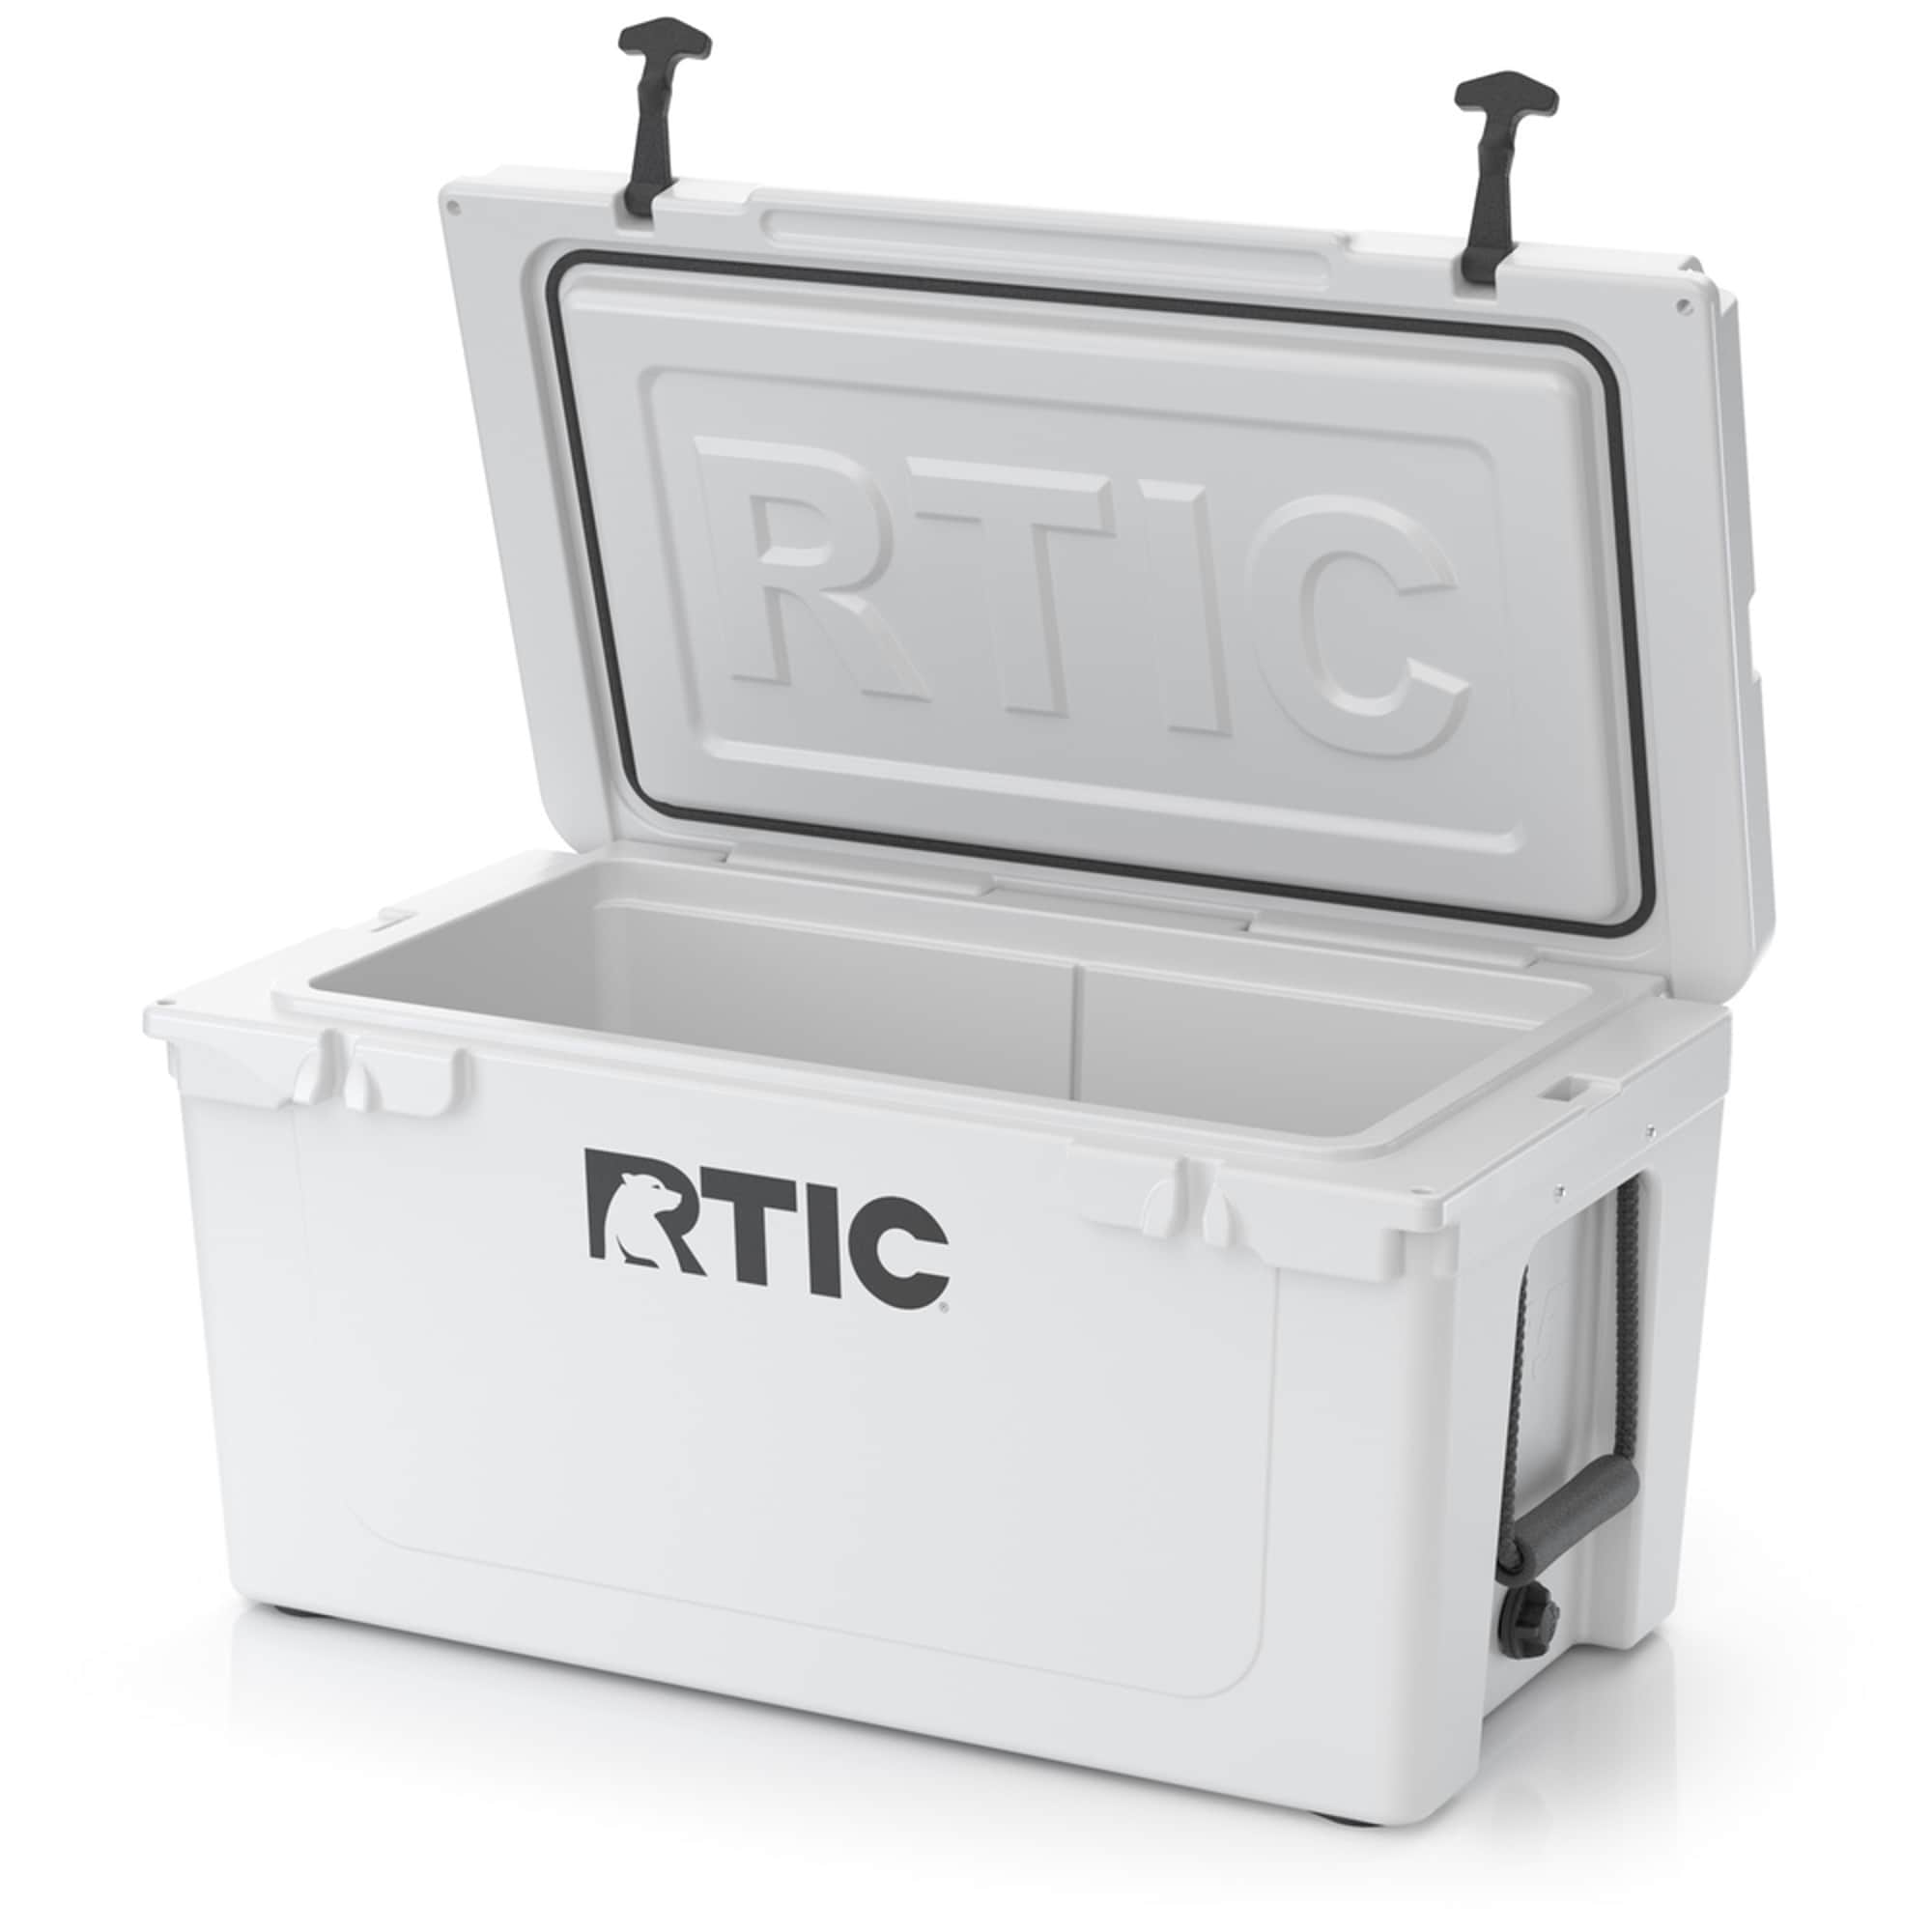 RTIC Hard Cooler Review - Man Makes Fire